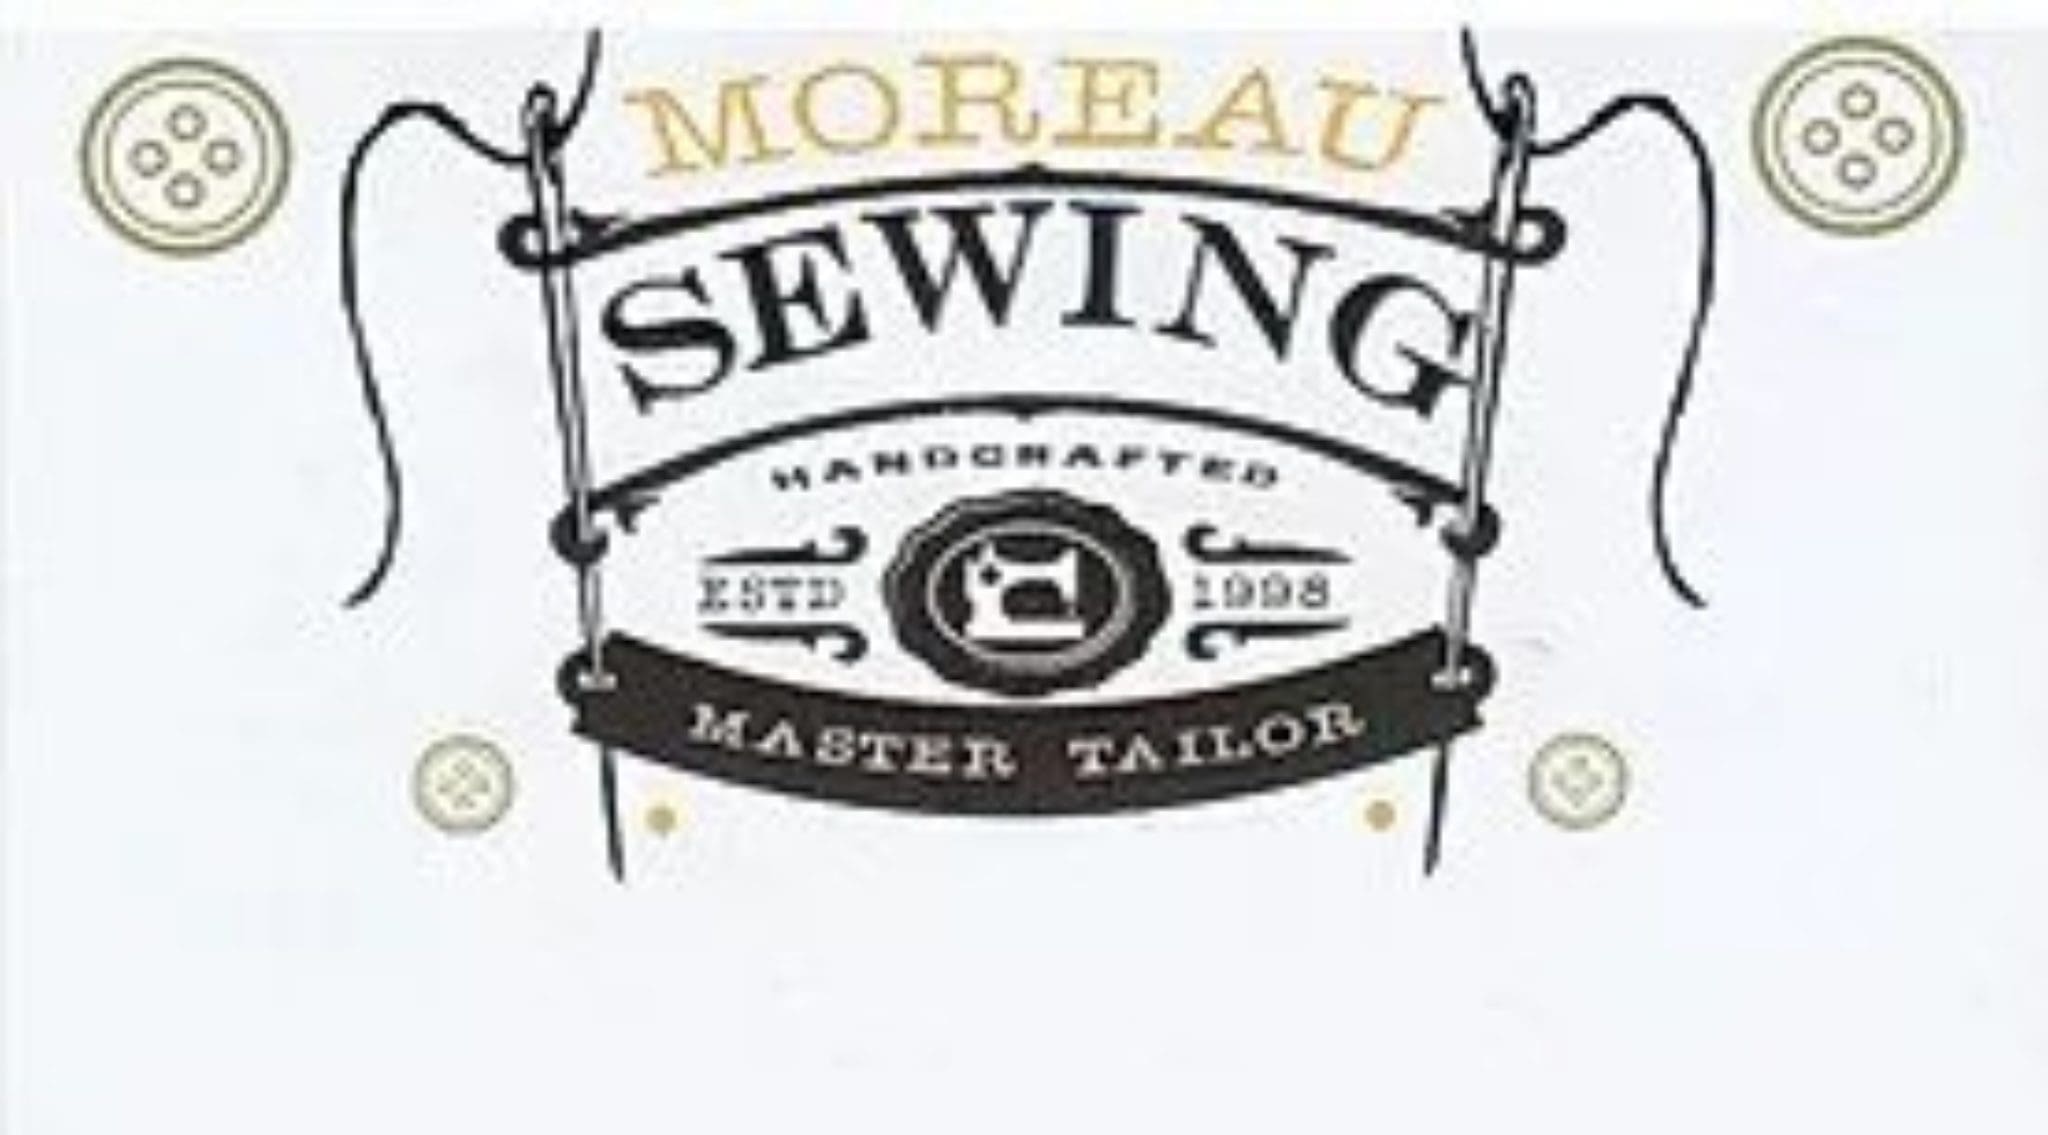 Moreau Sewing Unlimited